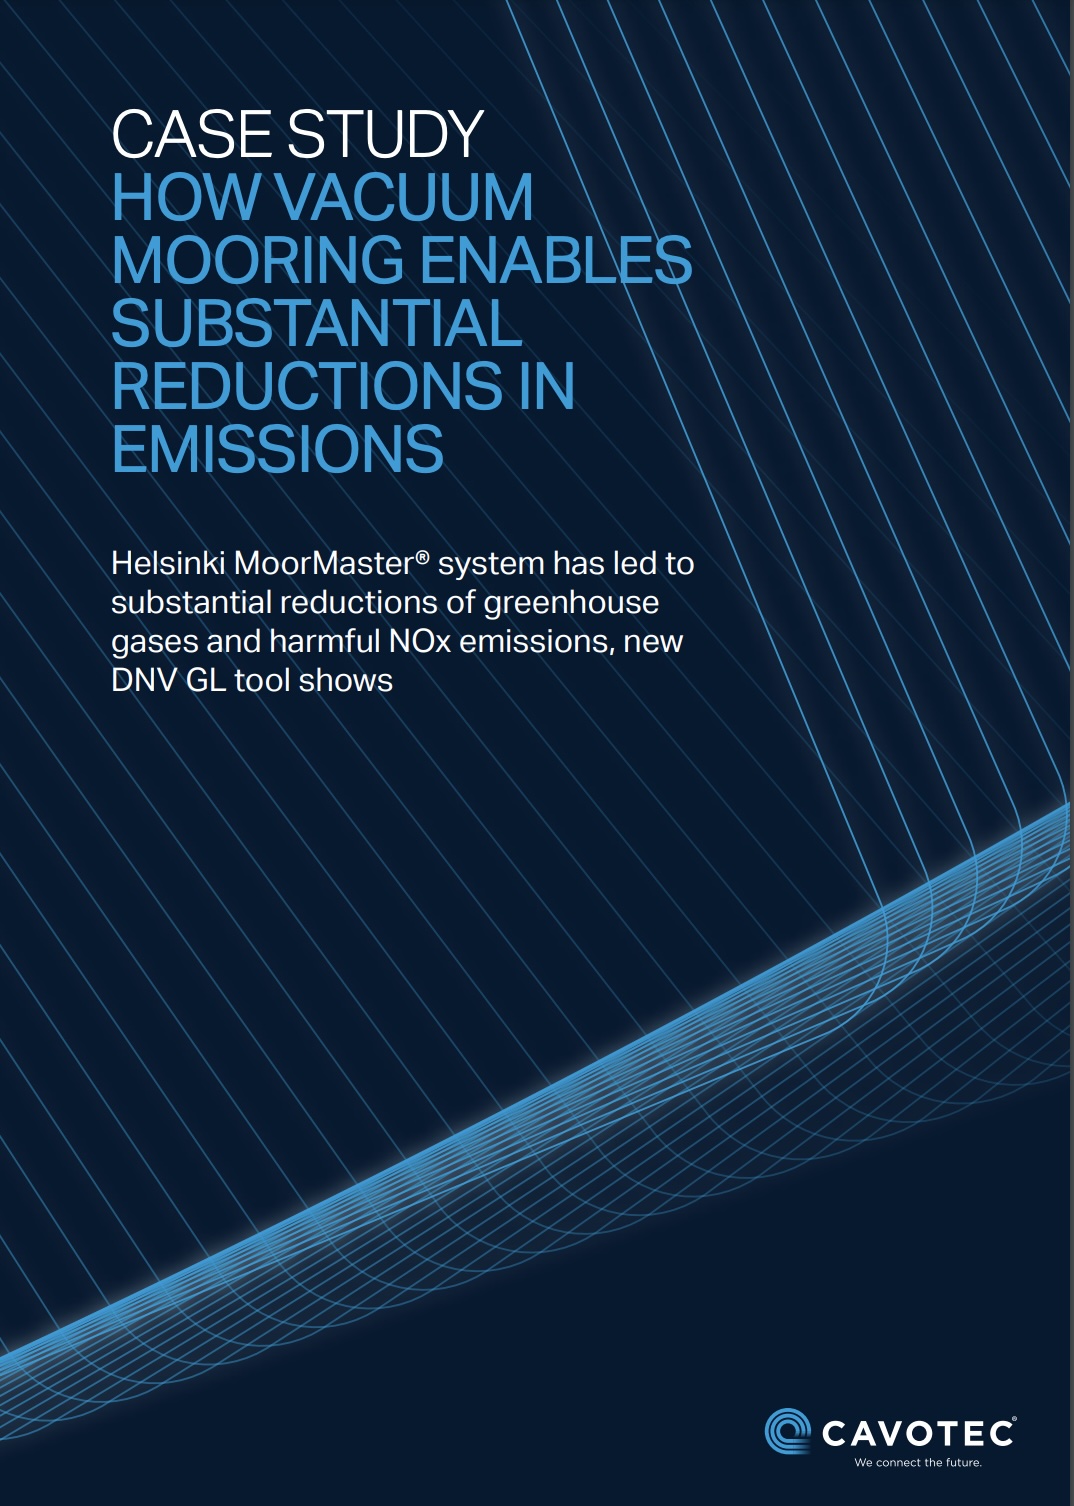 Case Study: How vacuum mooring enables substantial reductions in emissions